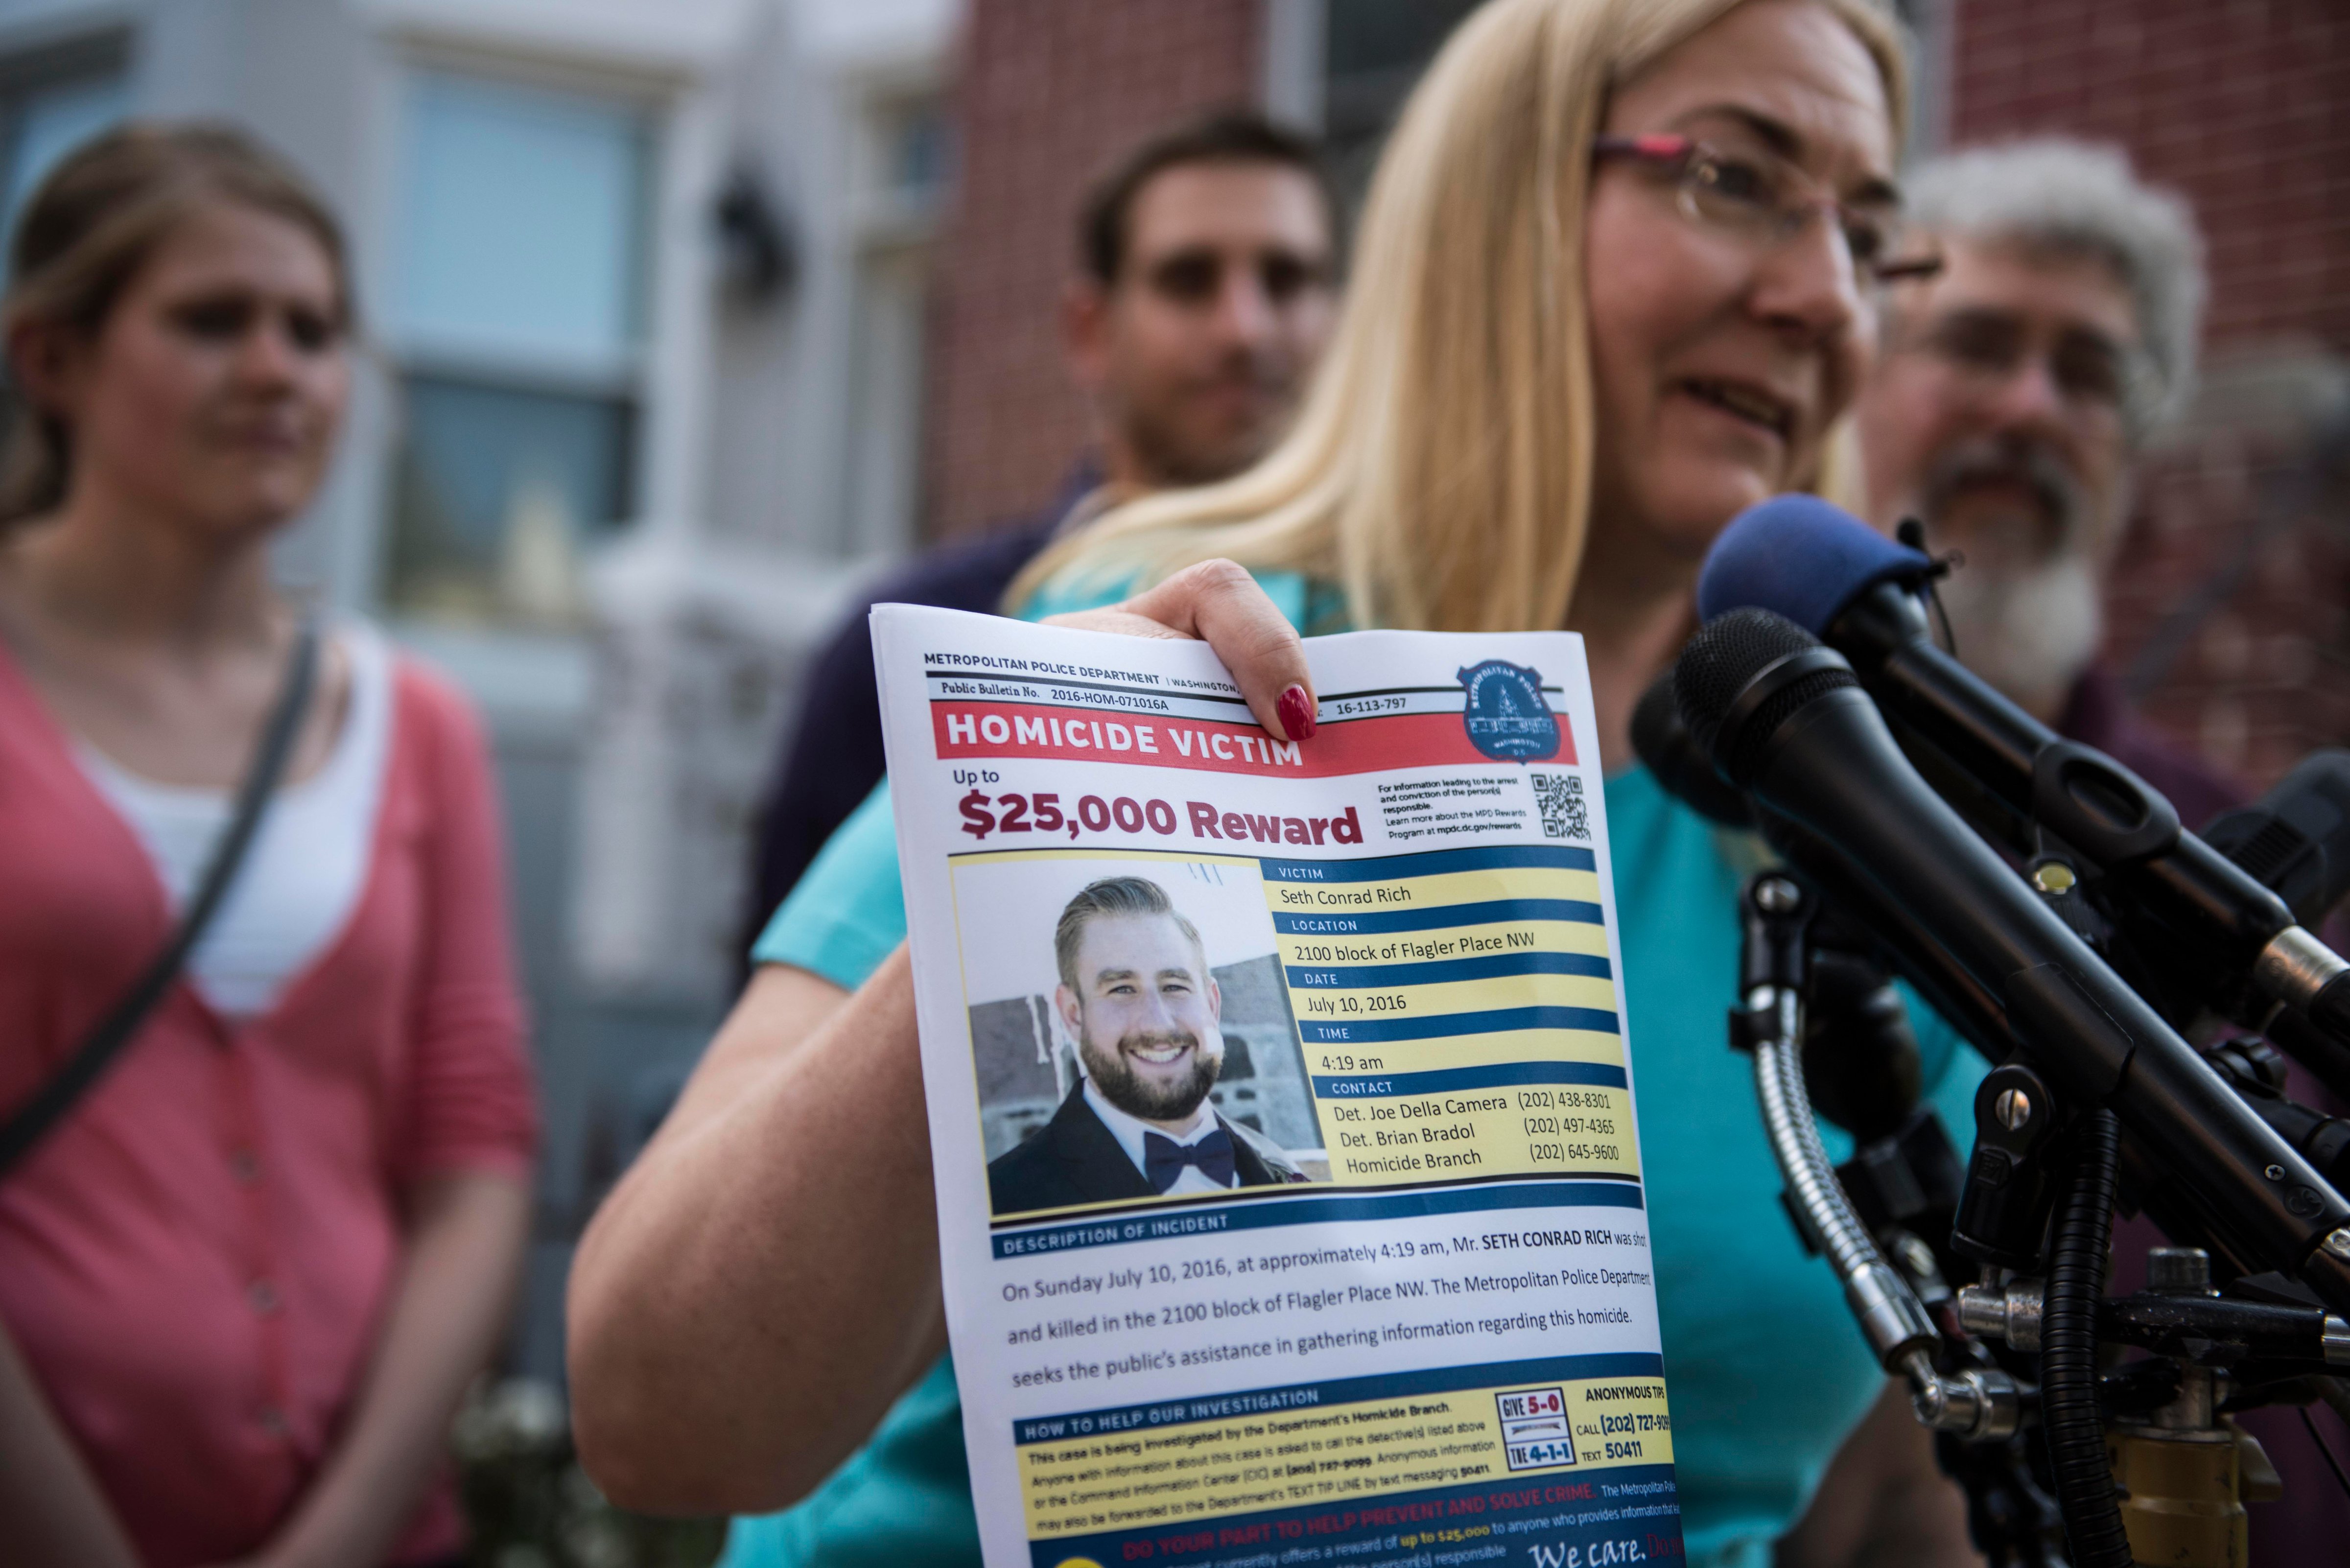 Mary Rich, the mother of slain DNC staffer Seth Rich, gives a press conference in Bloomingdale on August 1, 2016. (The Washington Post—The Washington Post/Getty Images)